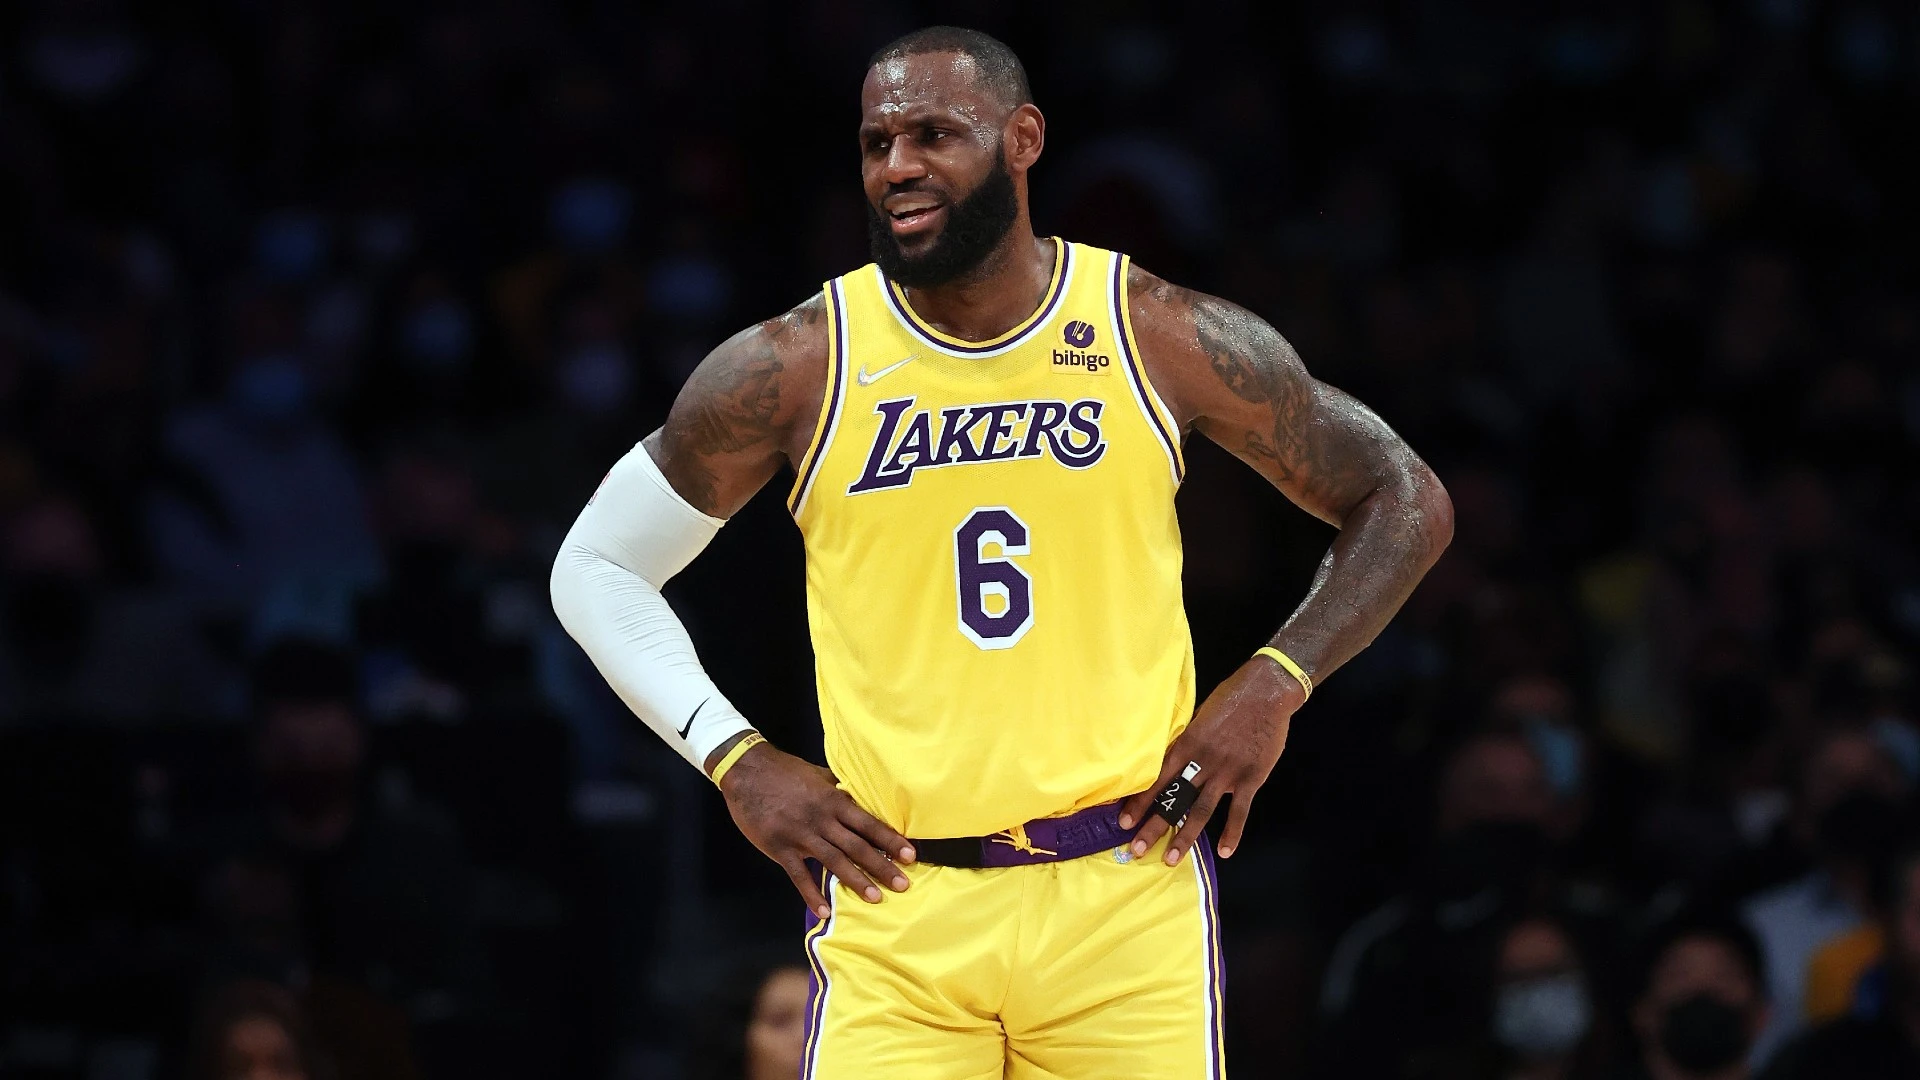 Lakers LeBron James had a hilarious encounter with Bill Hader in a thrilling film, titled ‘Trainwreck’